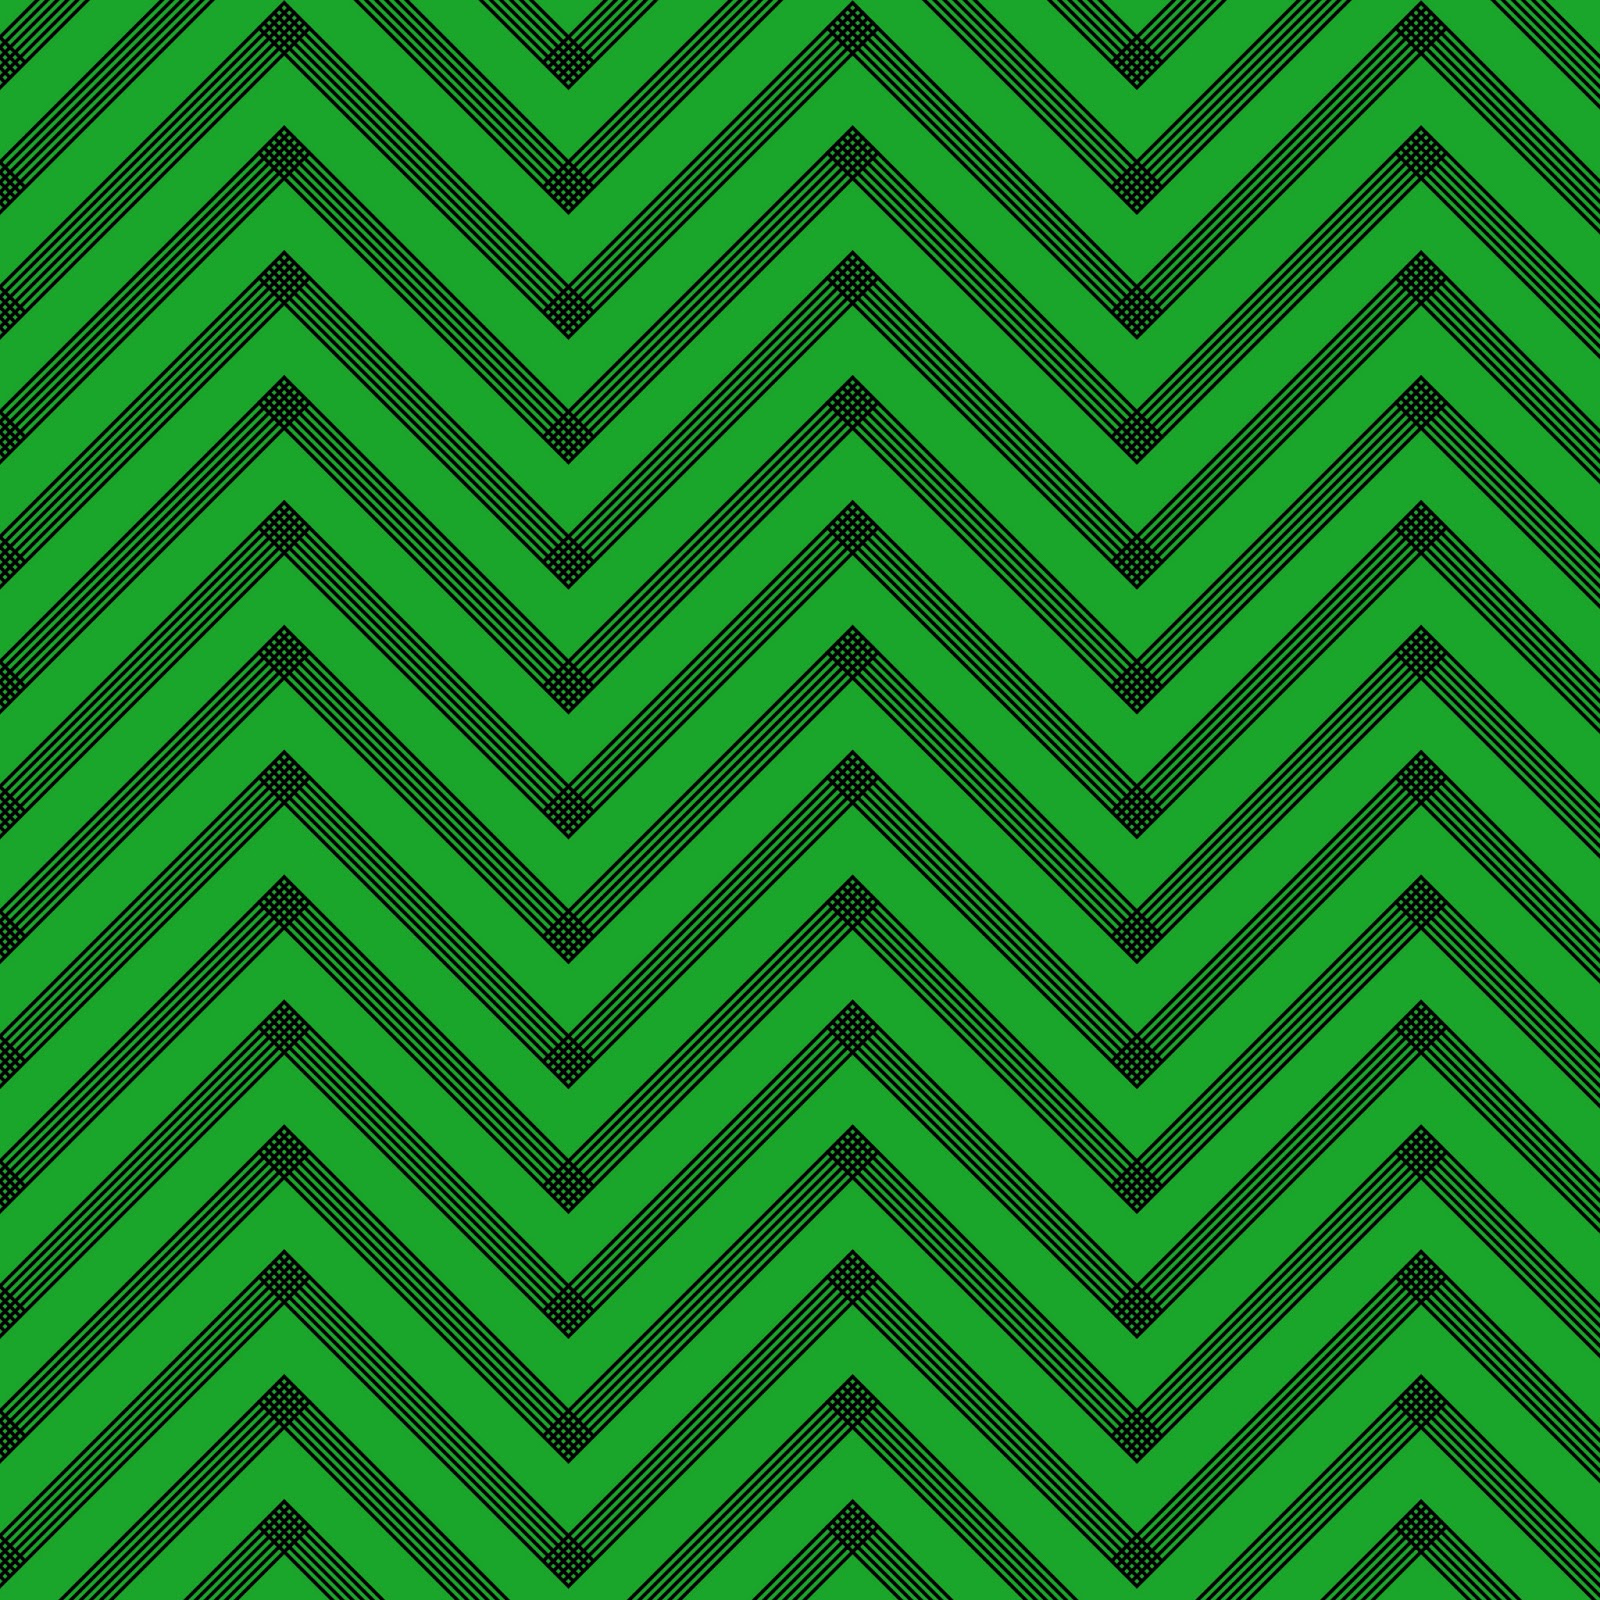 Chevron Backgrounds Navy And Green Chevron Background 1600x1600